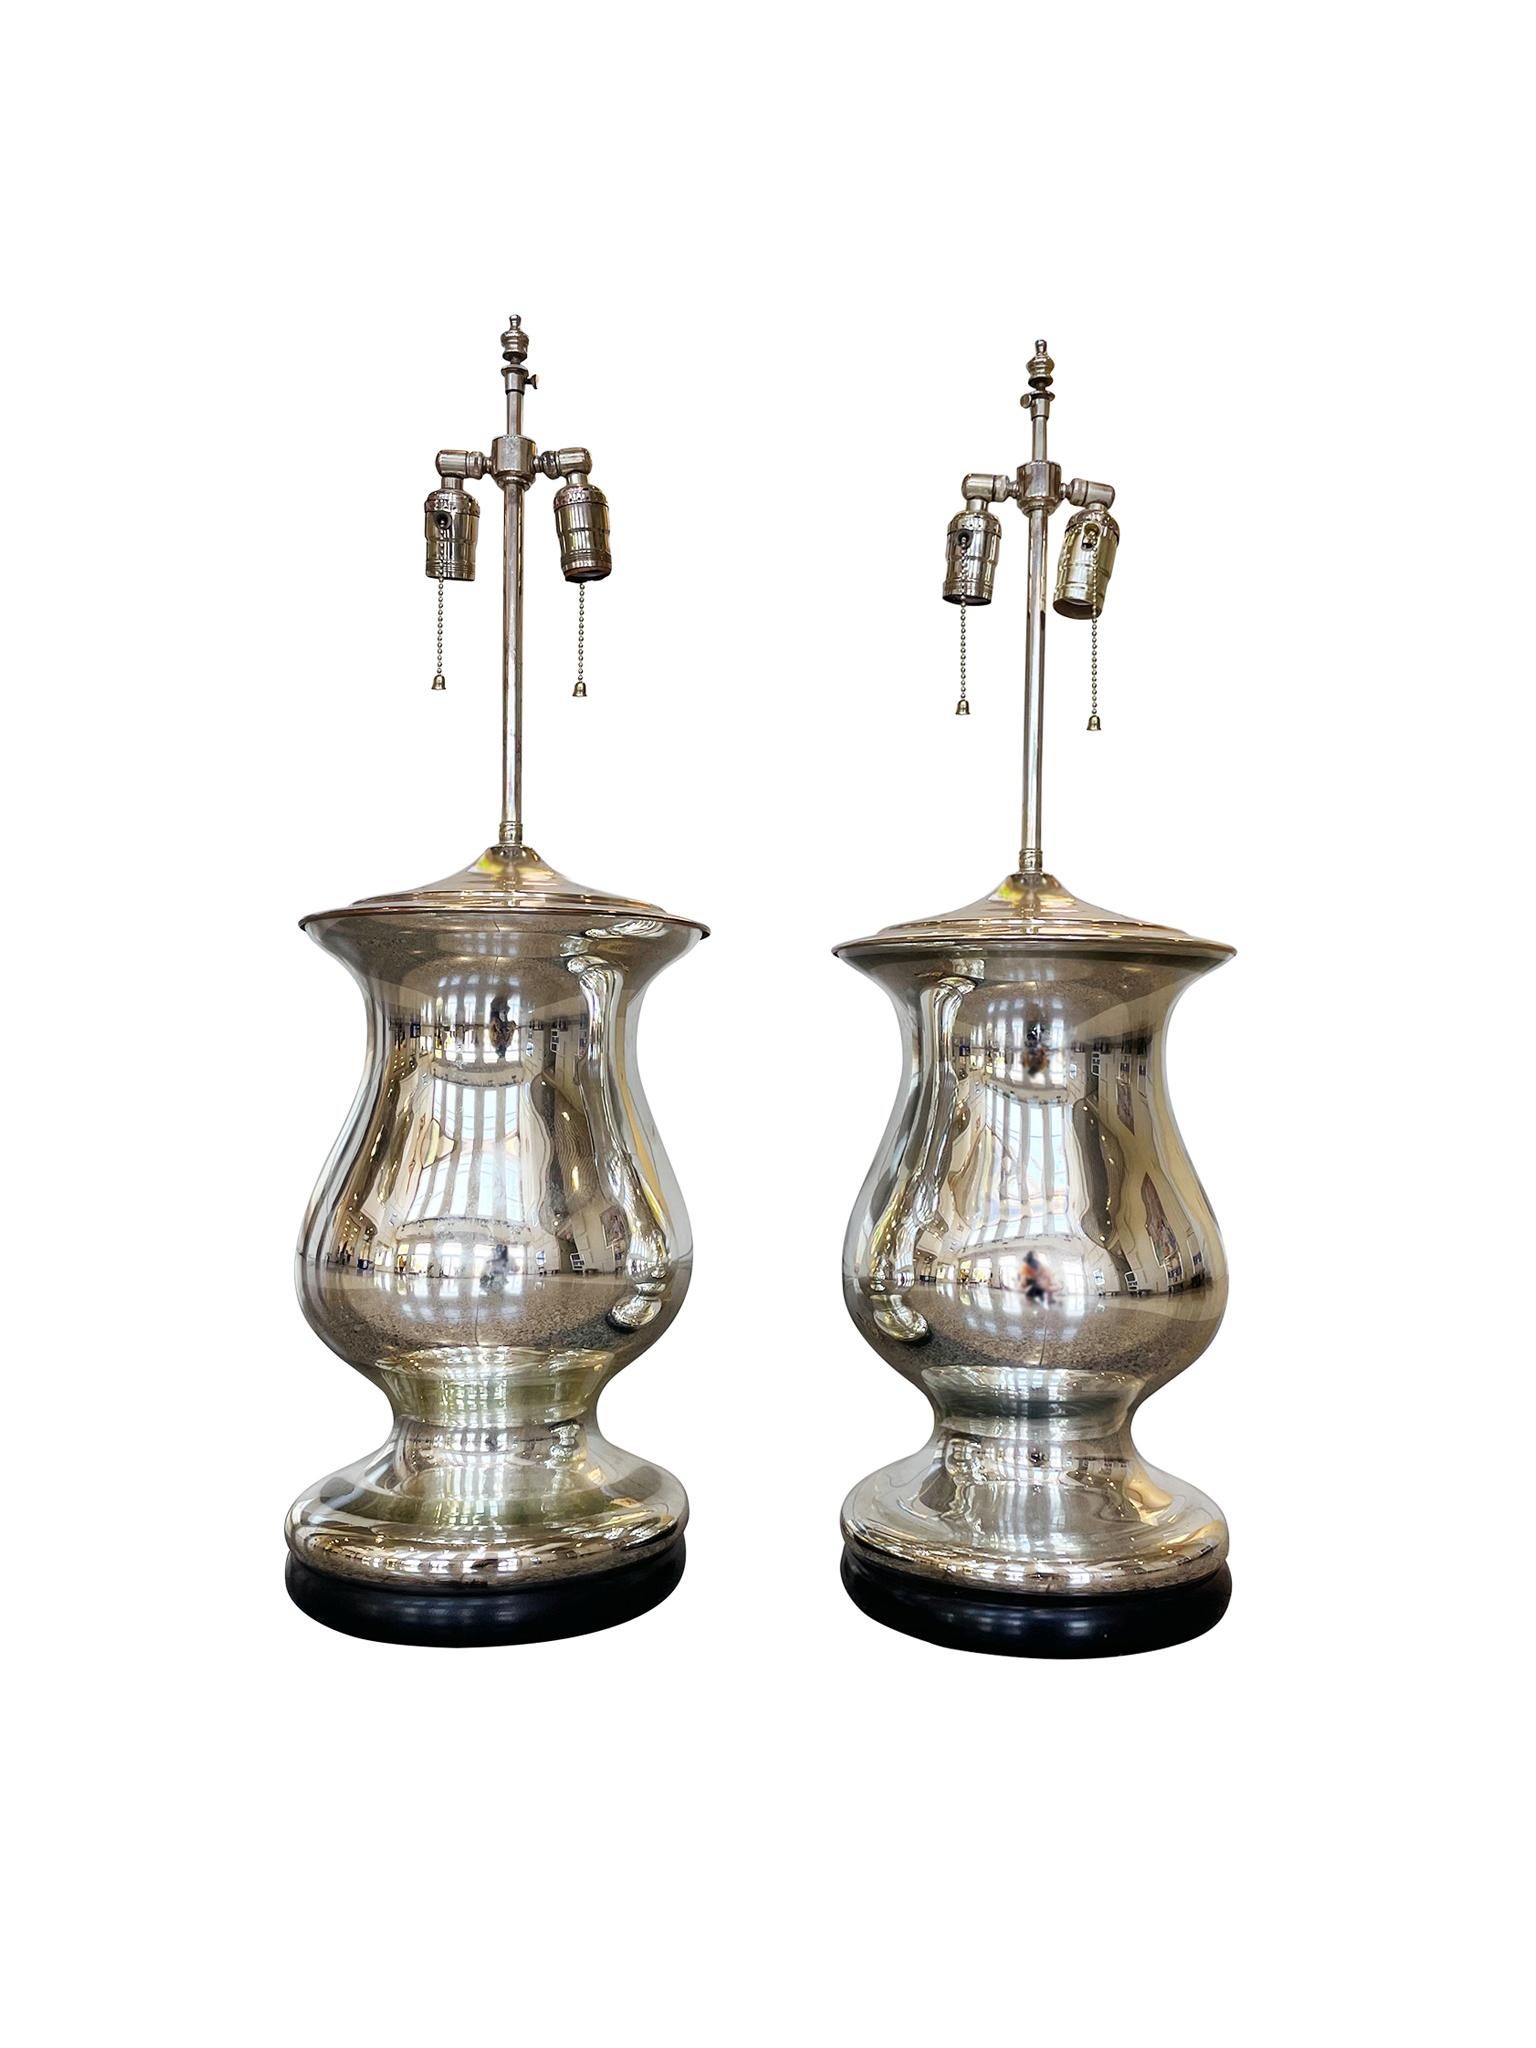 A pair of urn-shaped table lamps consisting of mercury glass bodies mounted on black lacquered wood bases. Mid-20th Century. The lamps are newly rewired with double sockets and paired with new white silk shades.

Dimensions:
33.5 in. overall